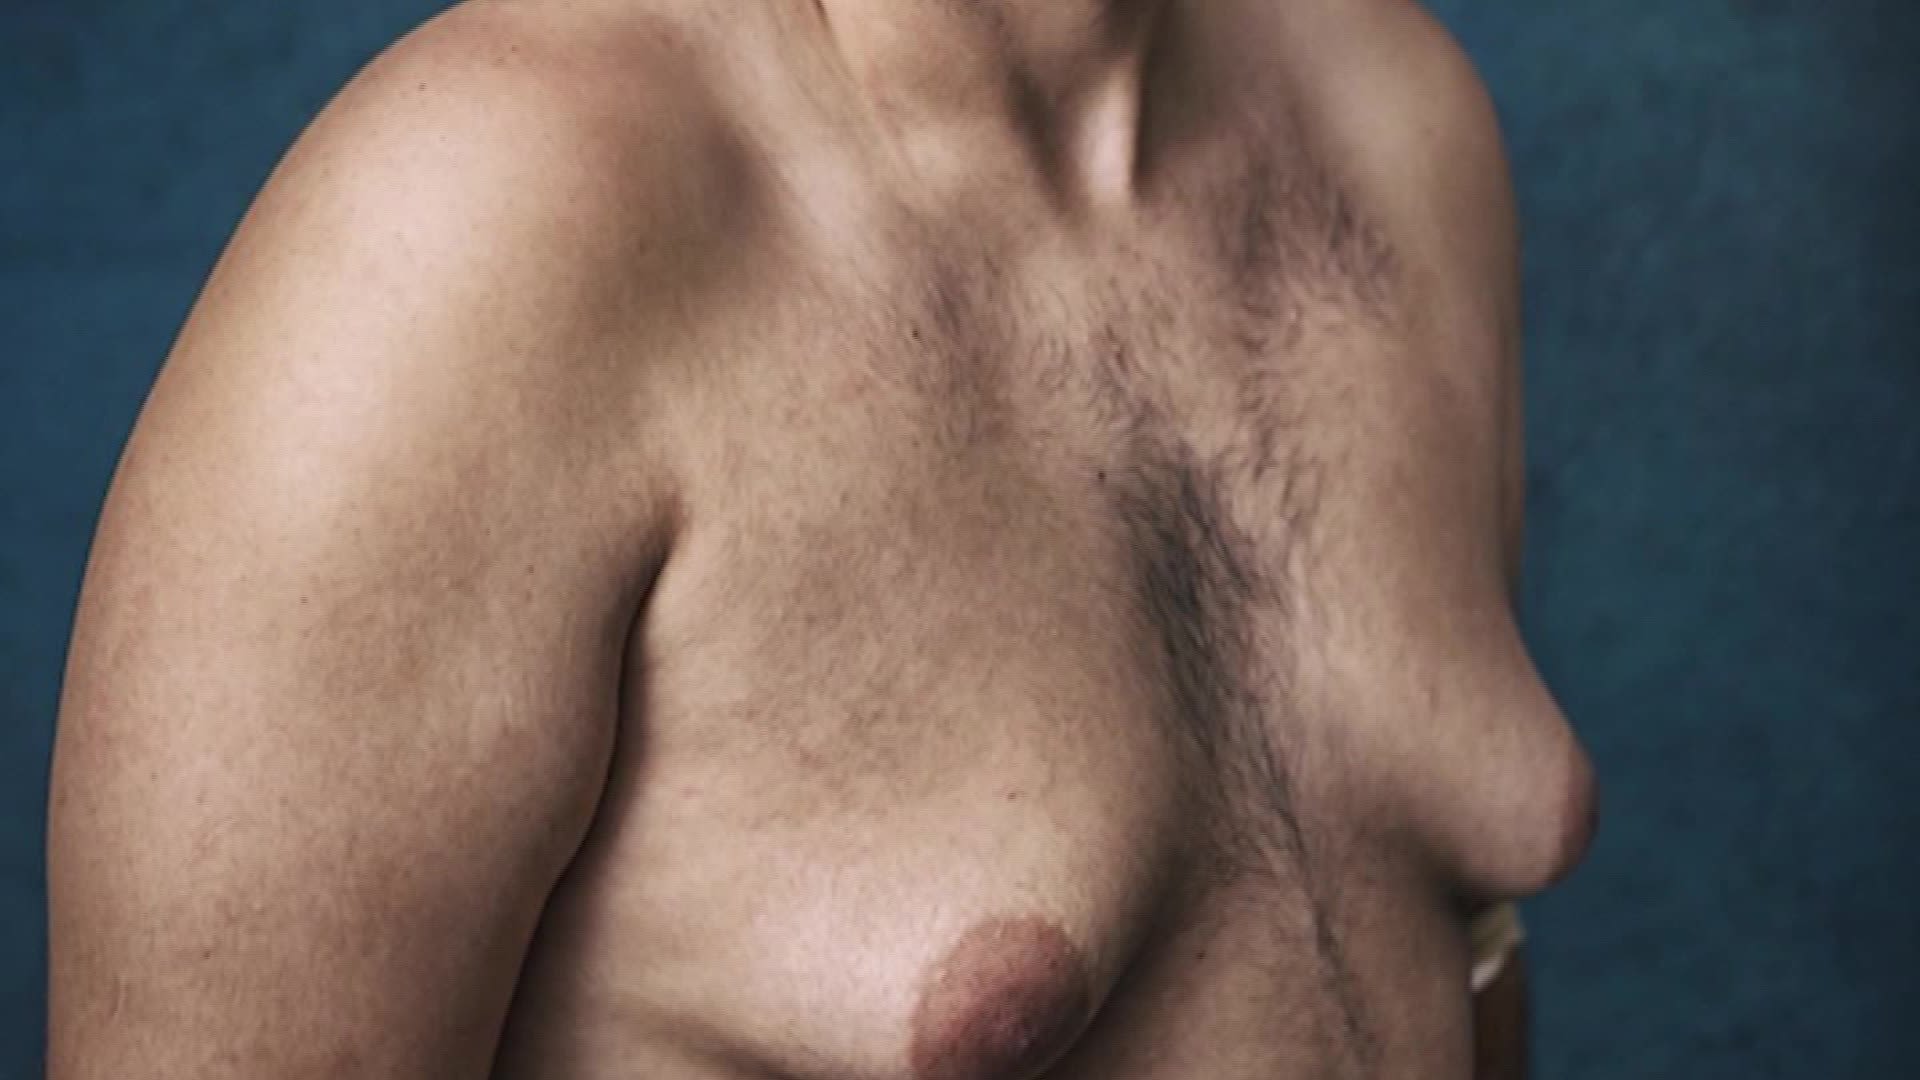 Men to sue over drug that made them grow breasts